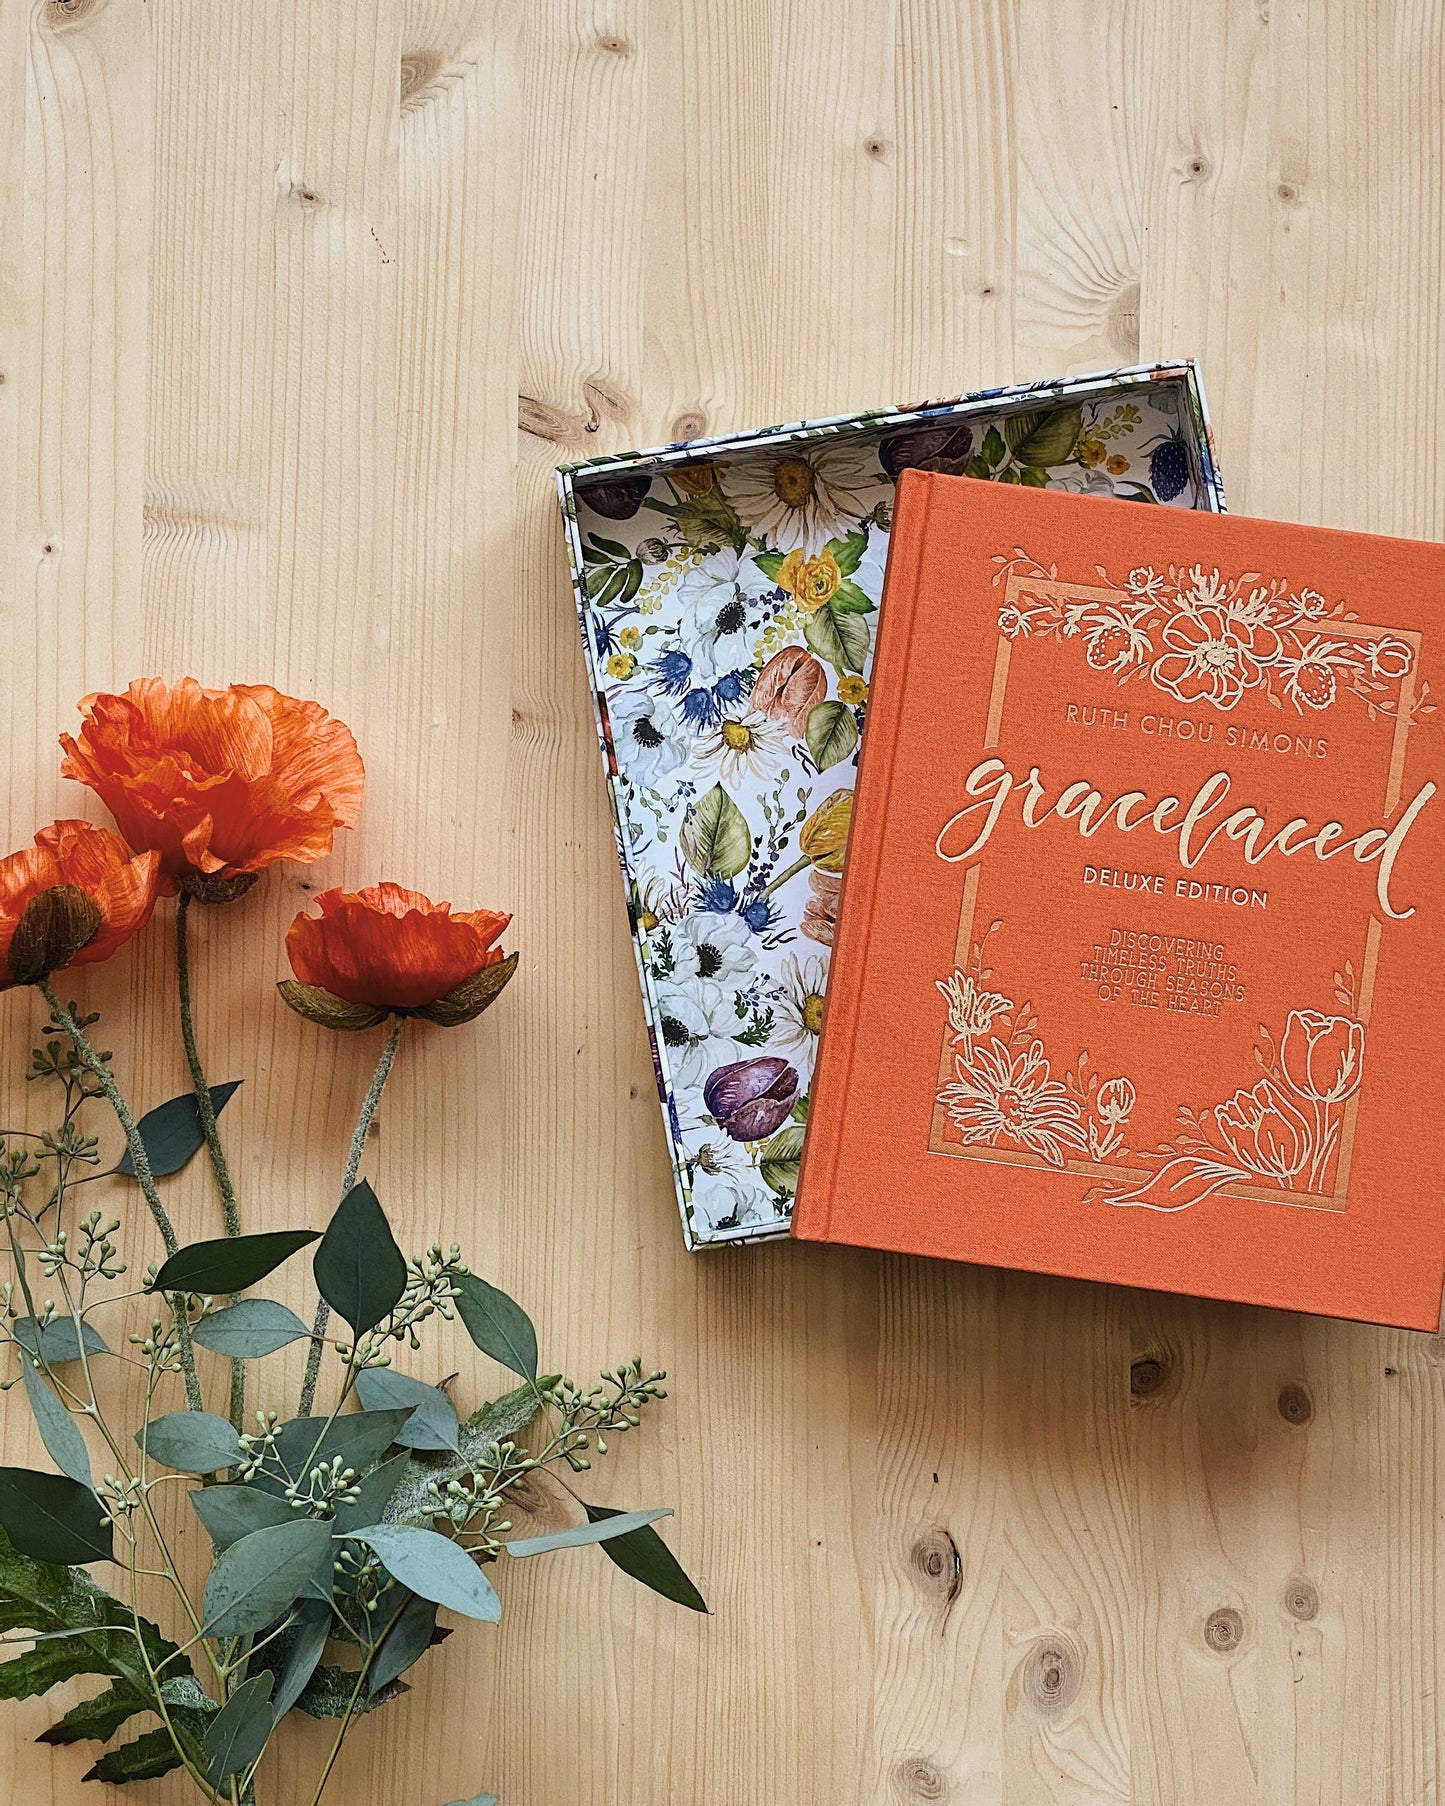 GraceLaced Deluxe Edition {Signed Bookplate}